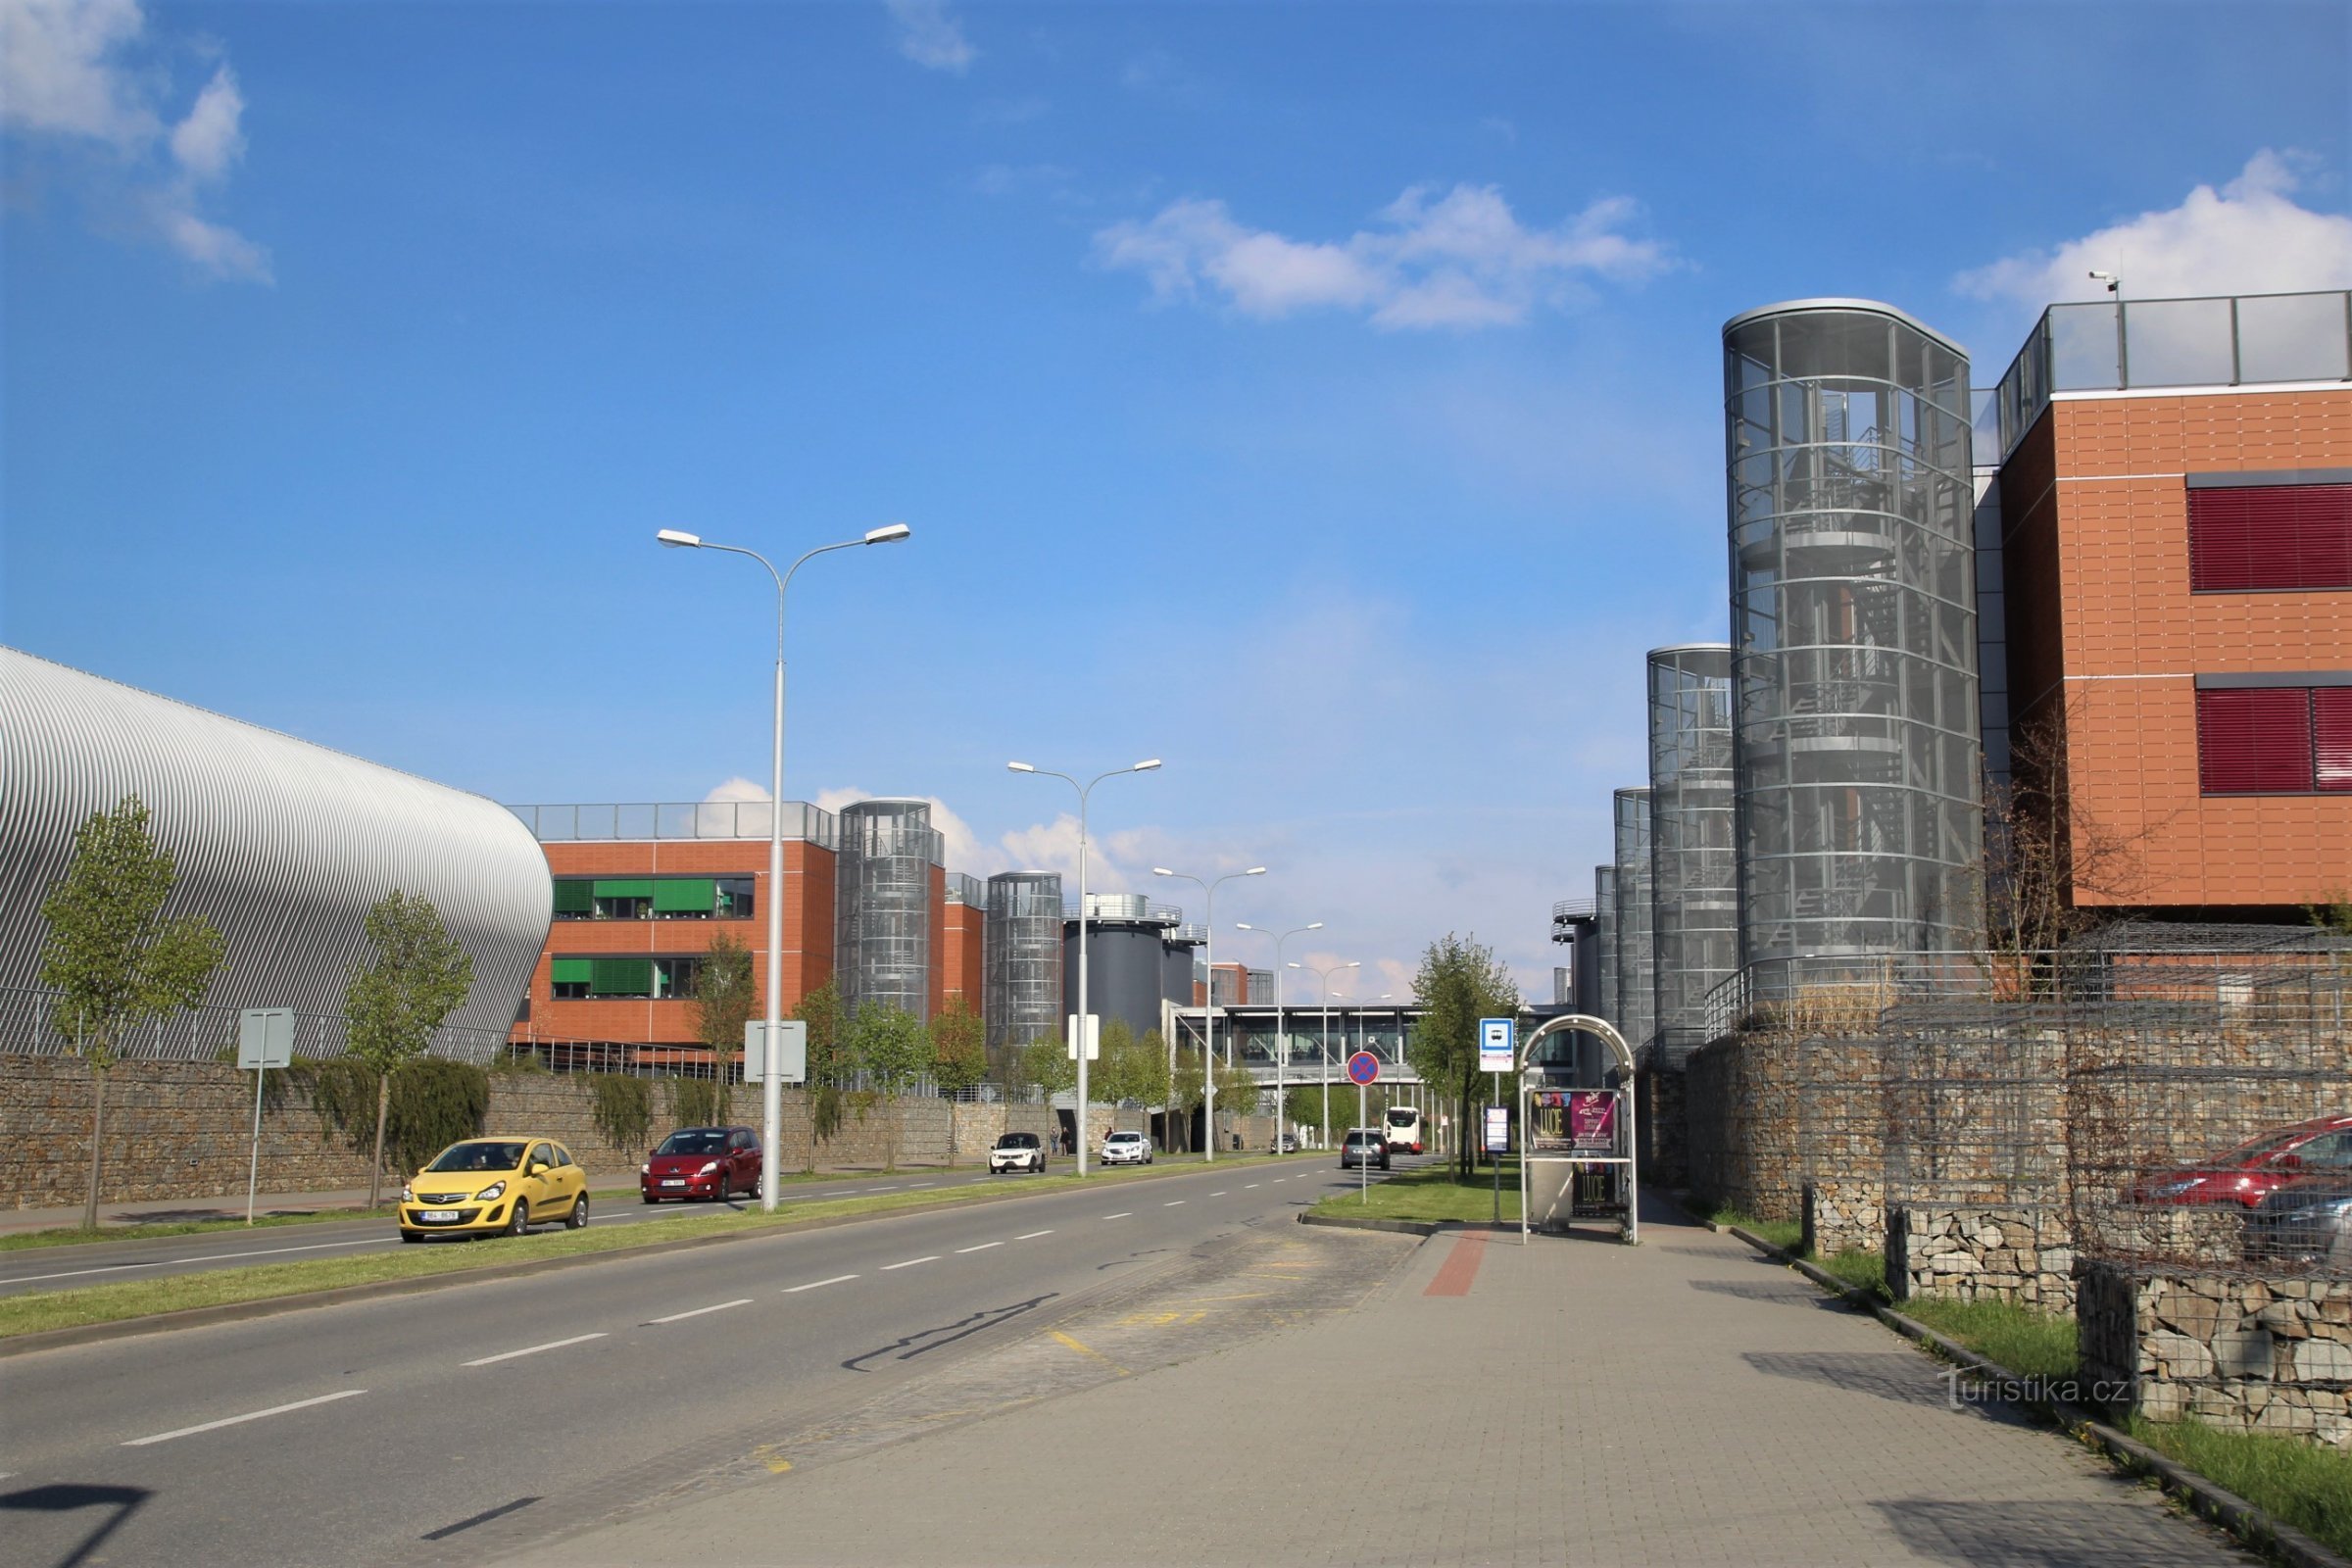 View of the Campus from Kamenice Street